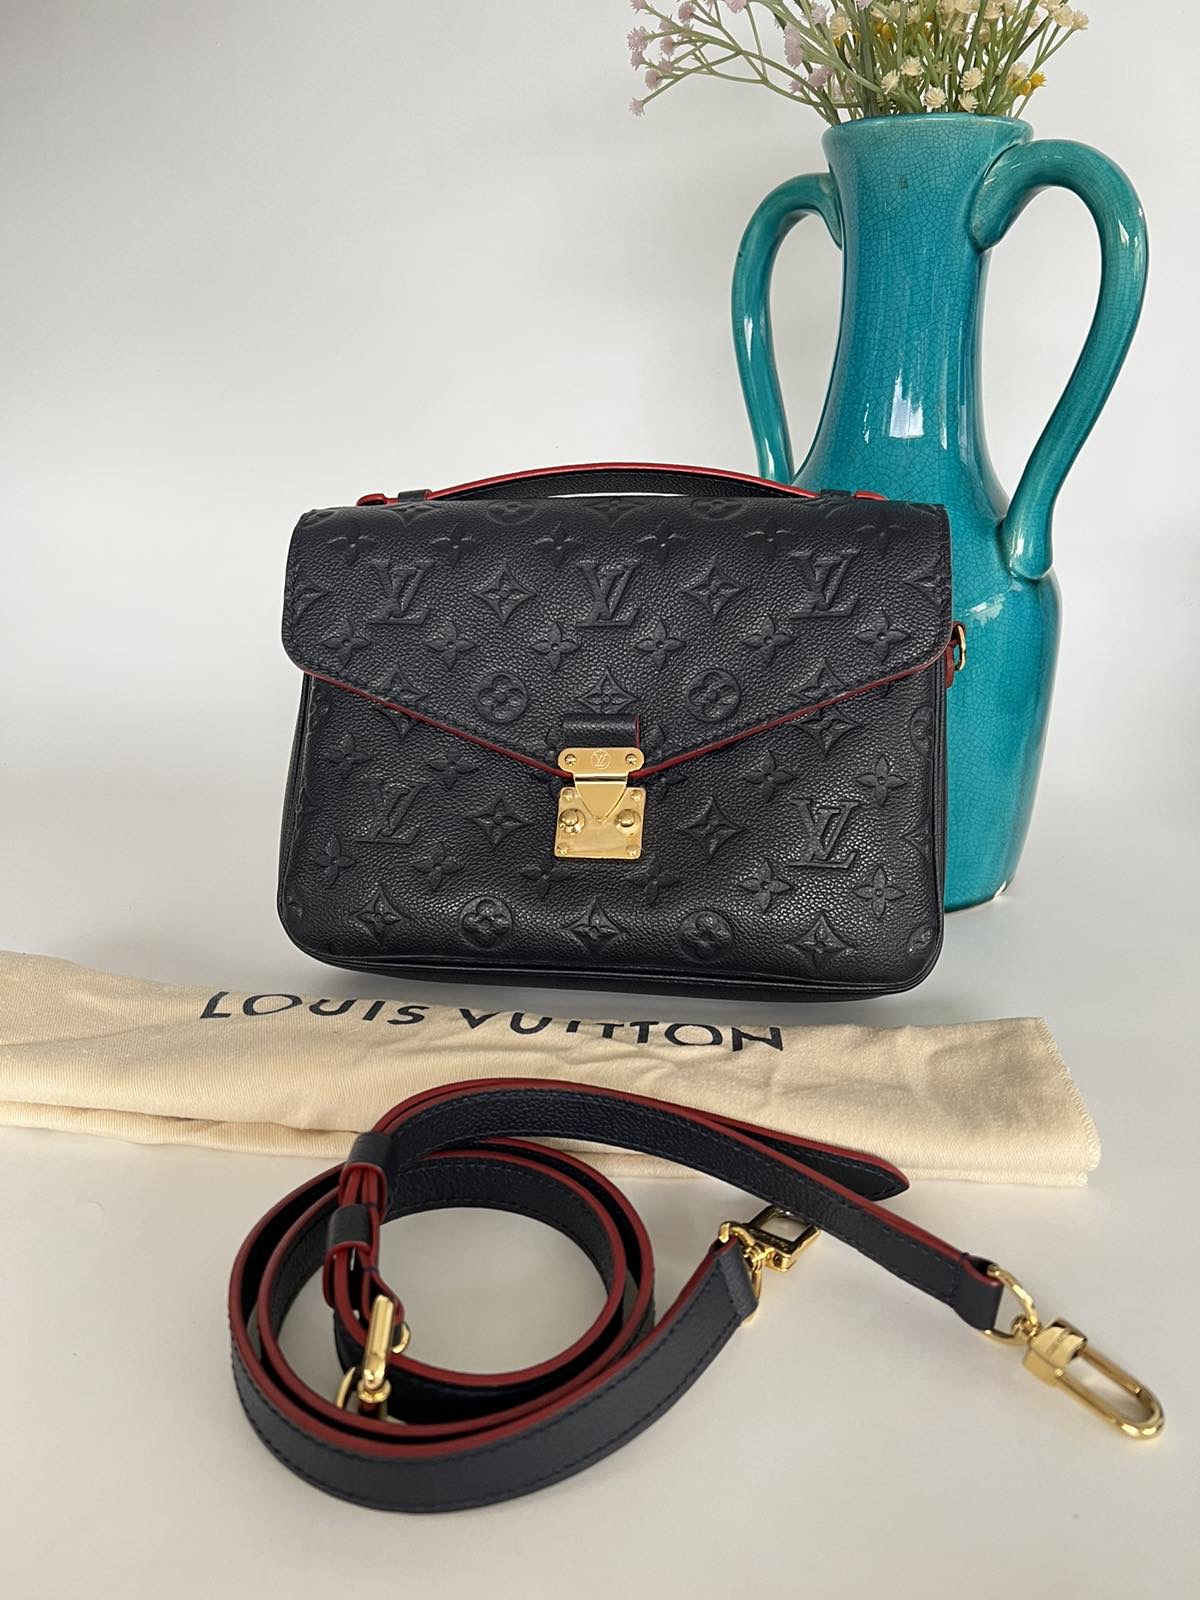 Louis Vuitton Epi Leather Speedy 30 Blue. Made in France. DC: VI0951